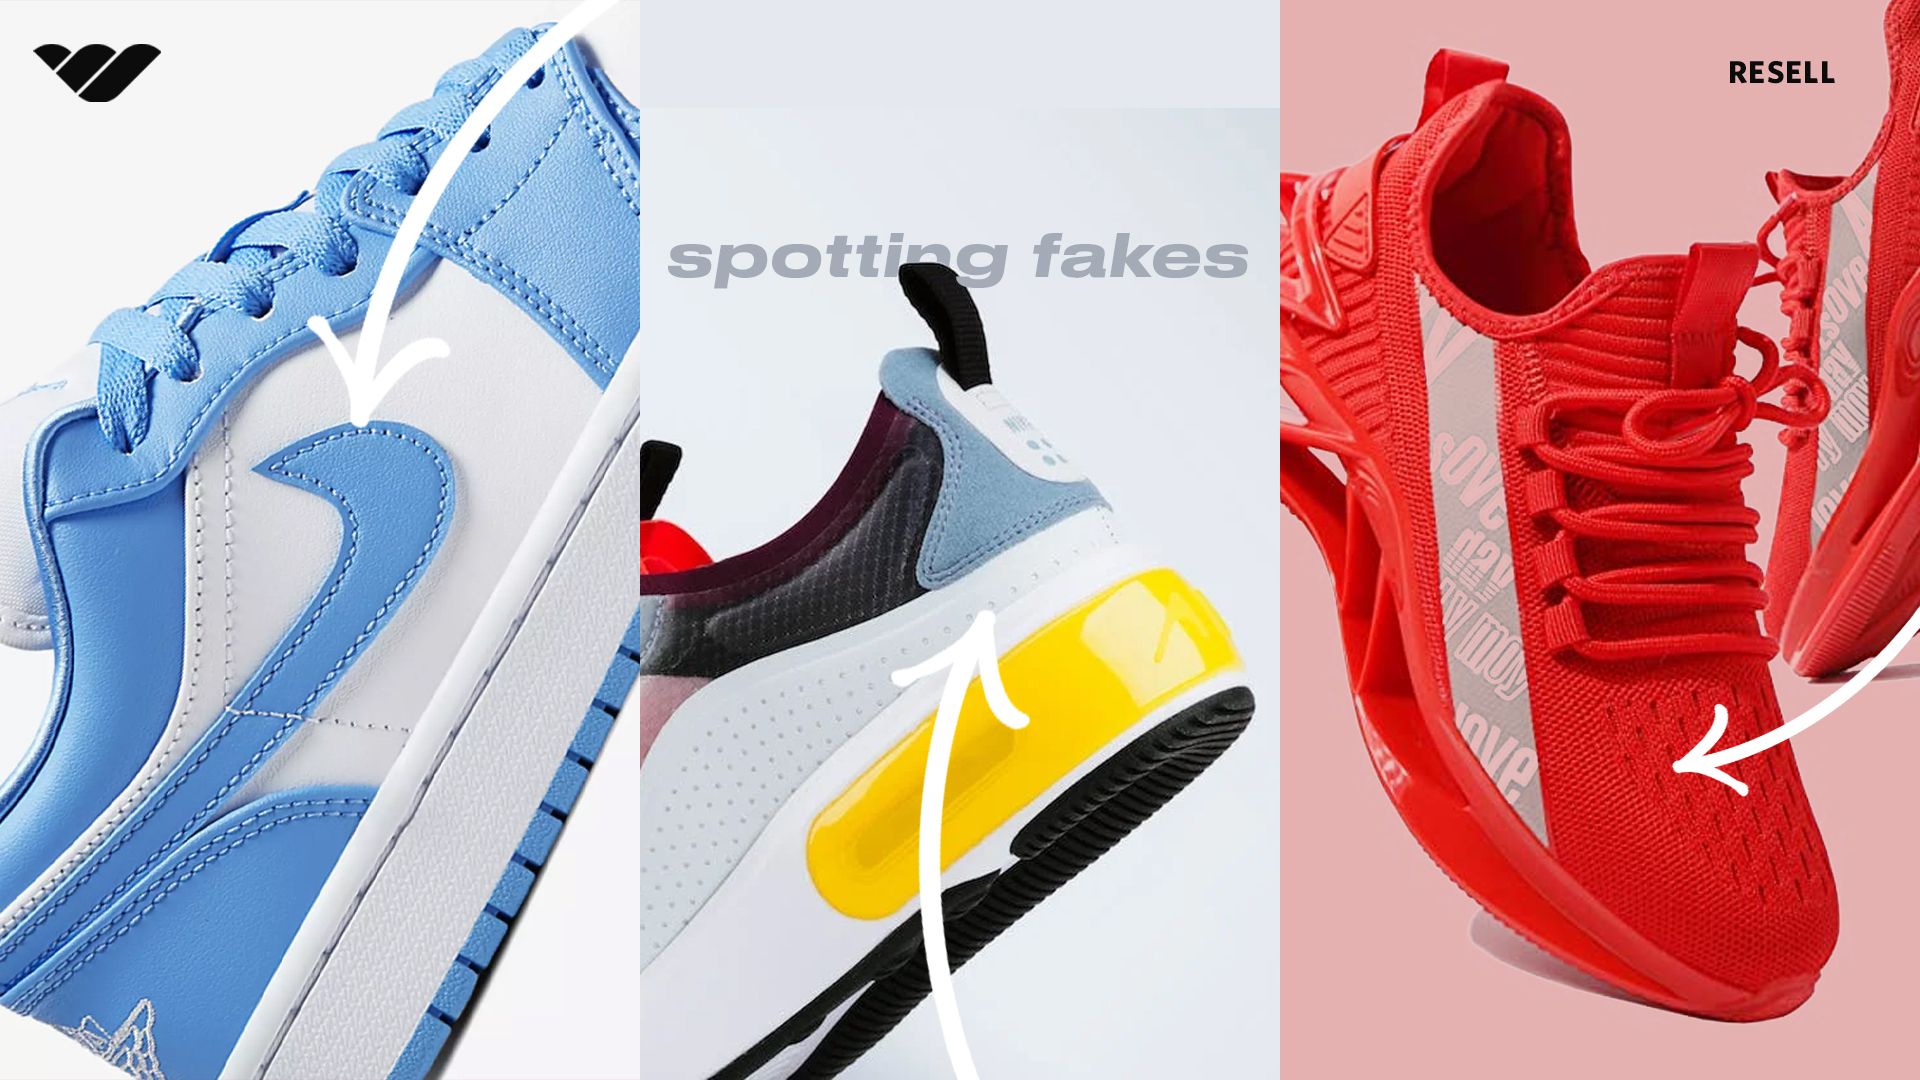 How to Spot Fake Sneakers